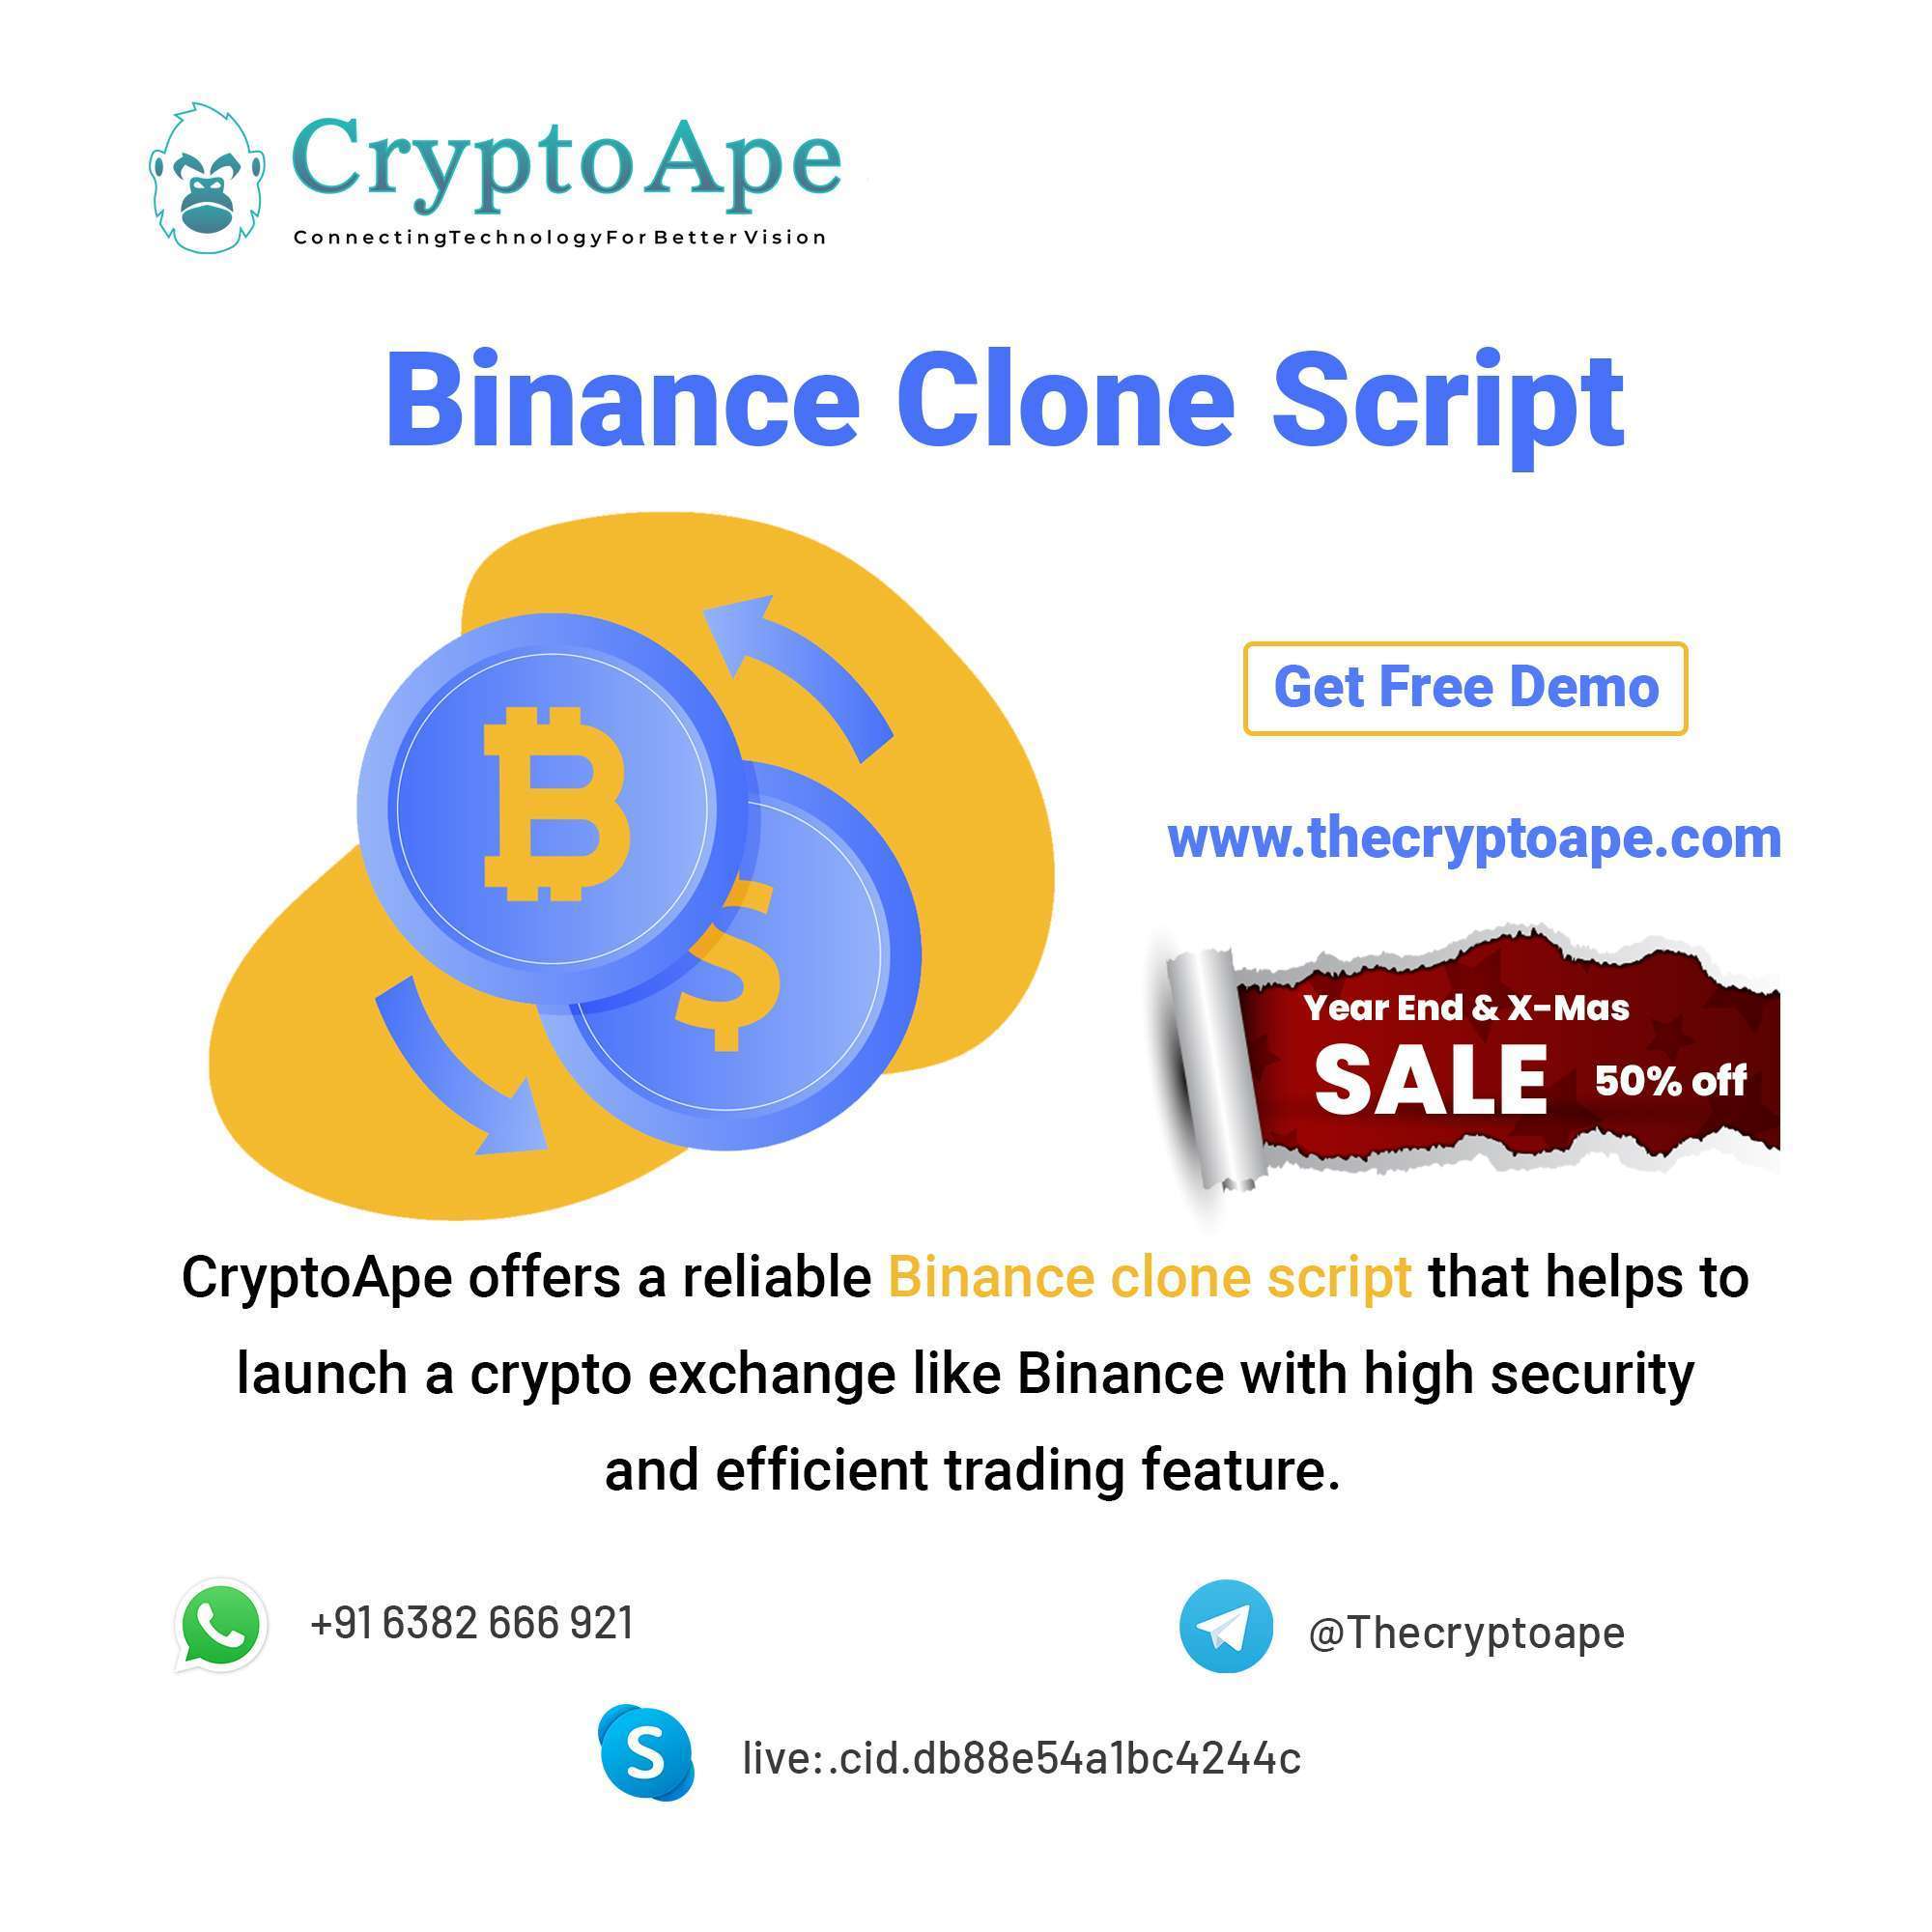 What are the benefits of starting a crypto exchange like Binance?